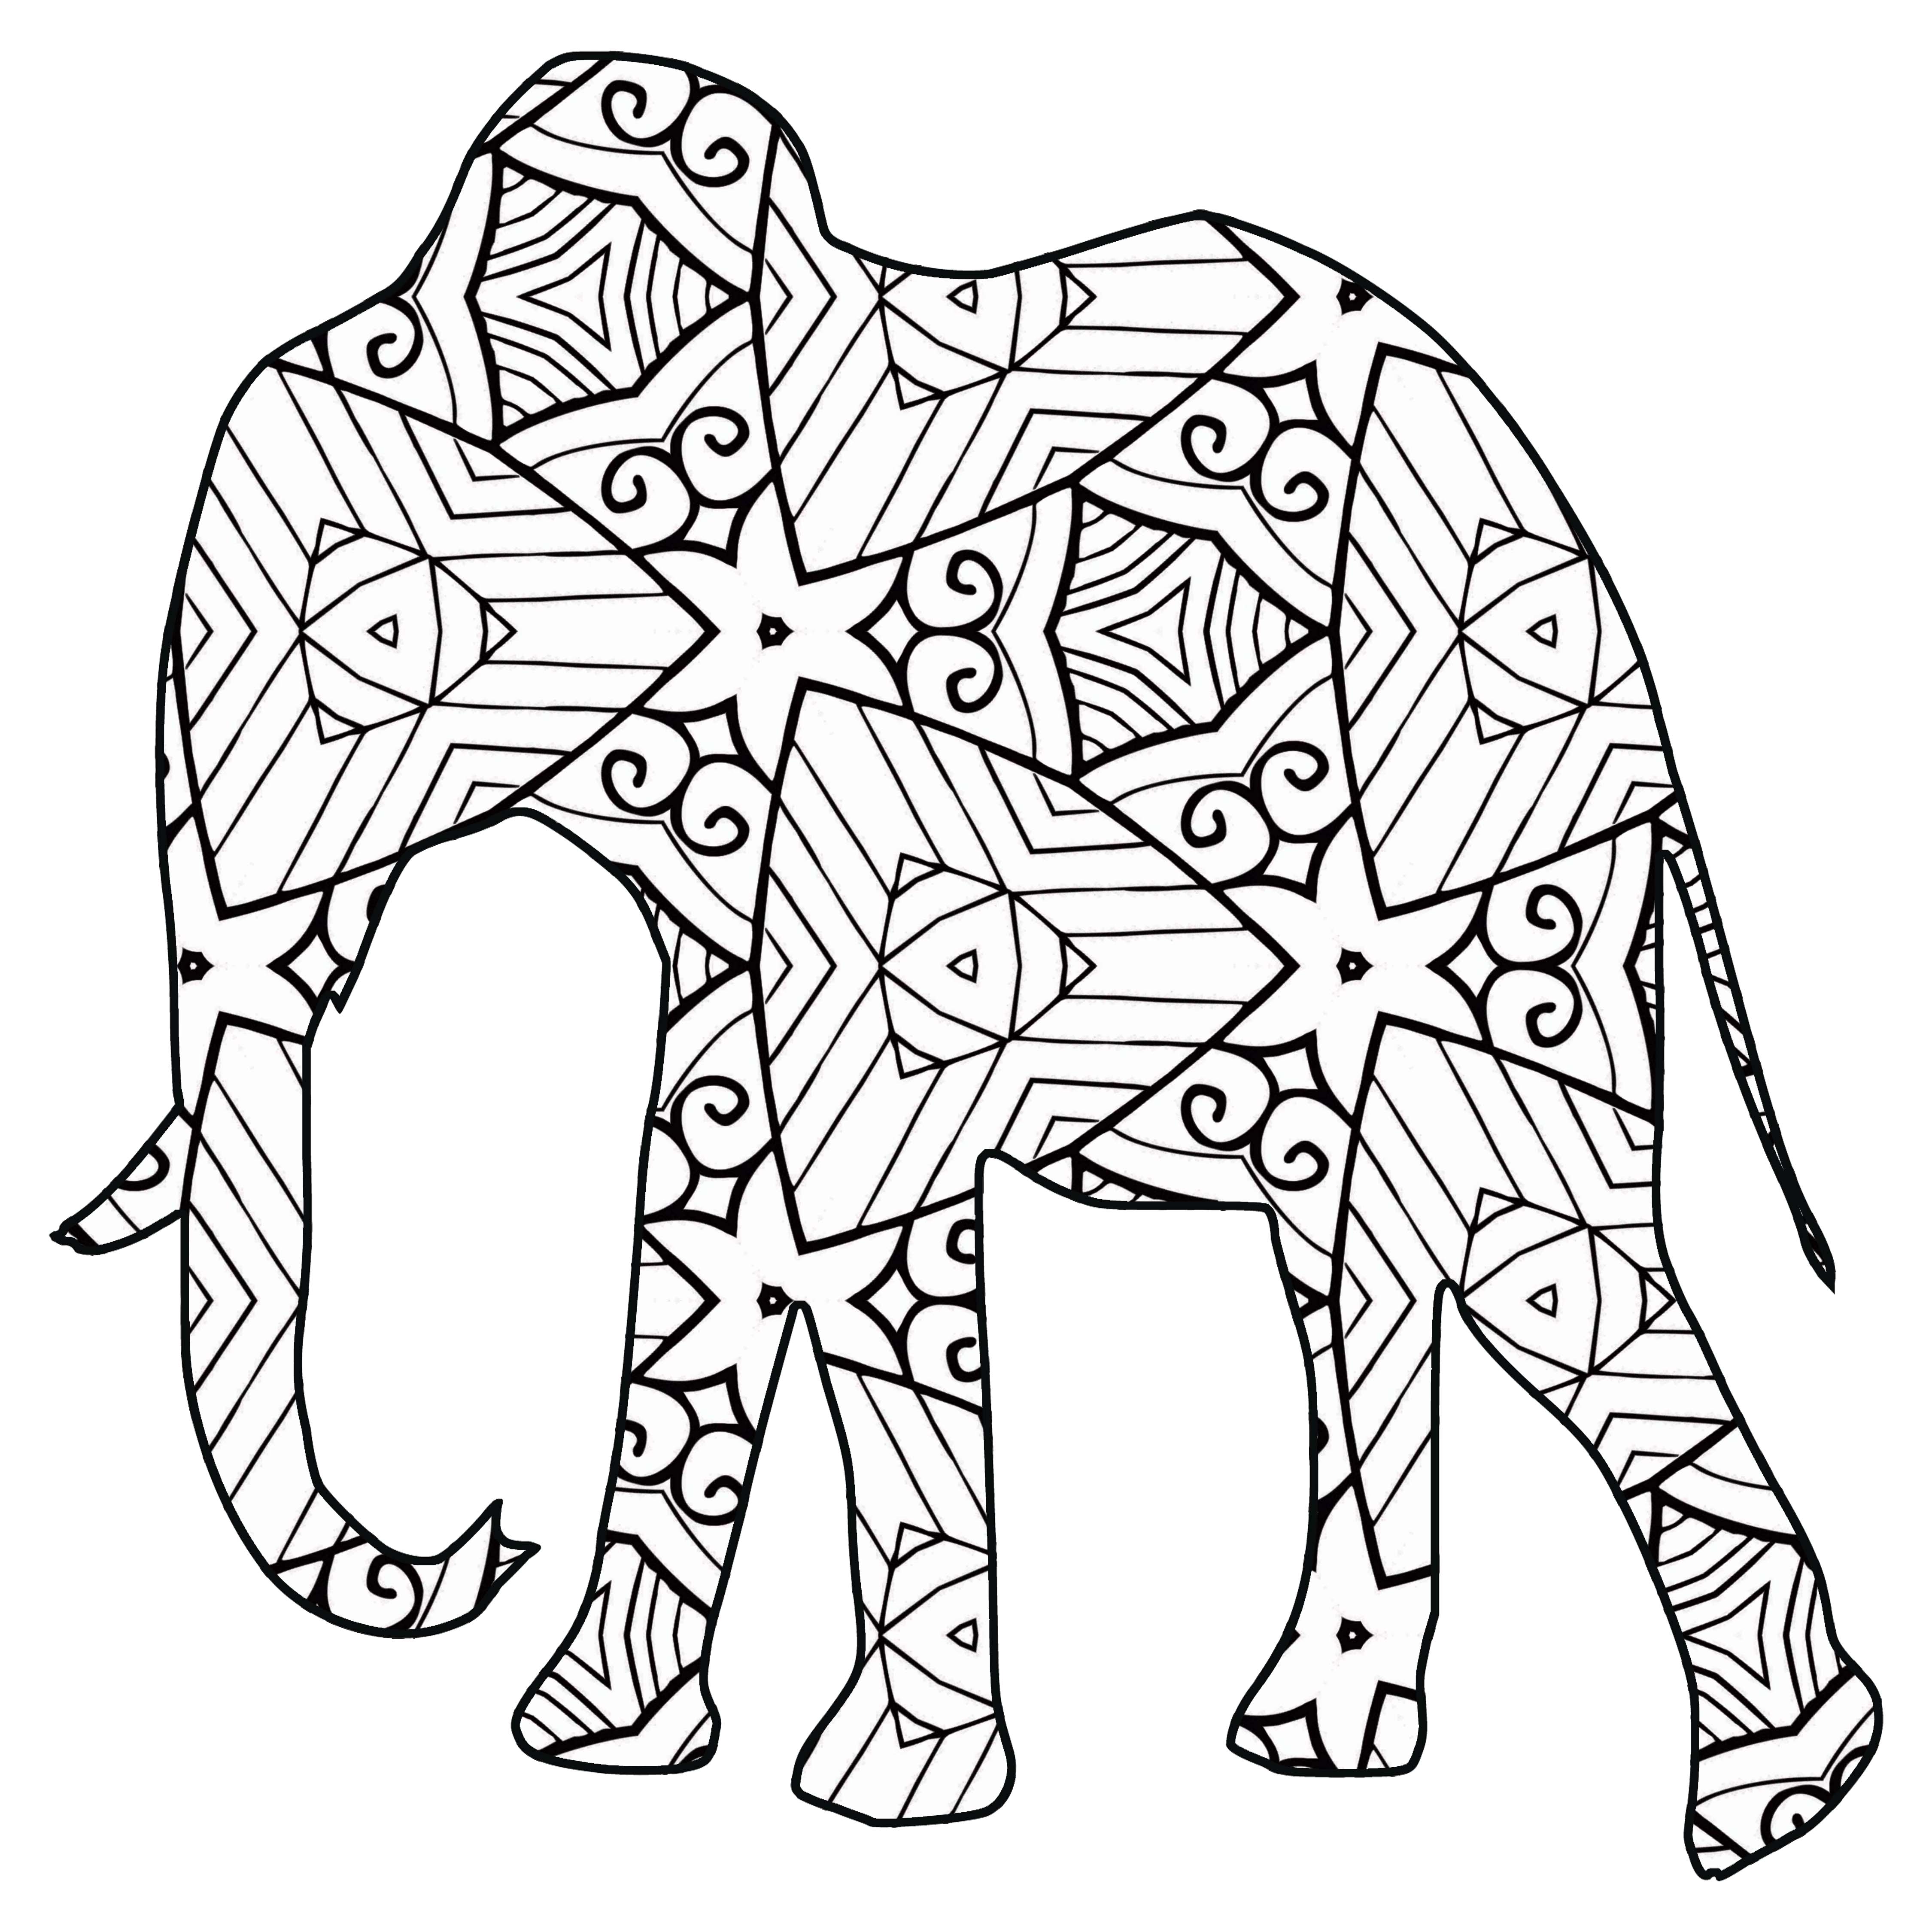 20 Free Printable Geometric Animal Coloring Pages   The Cottage Market